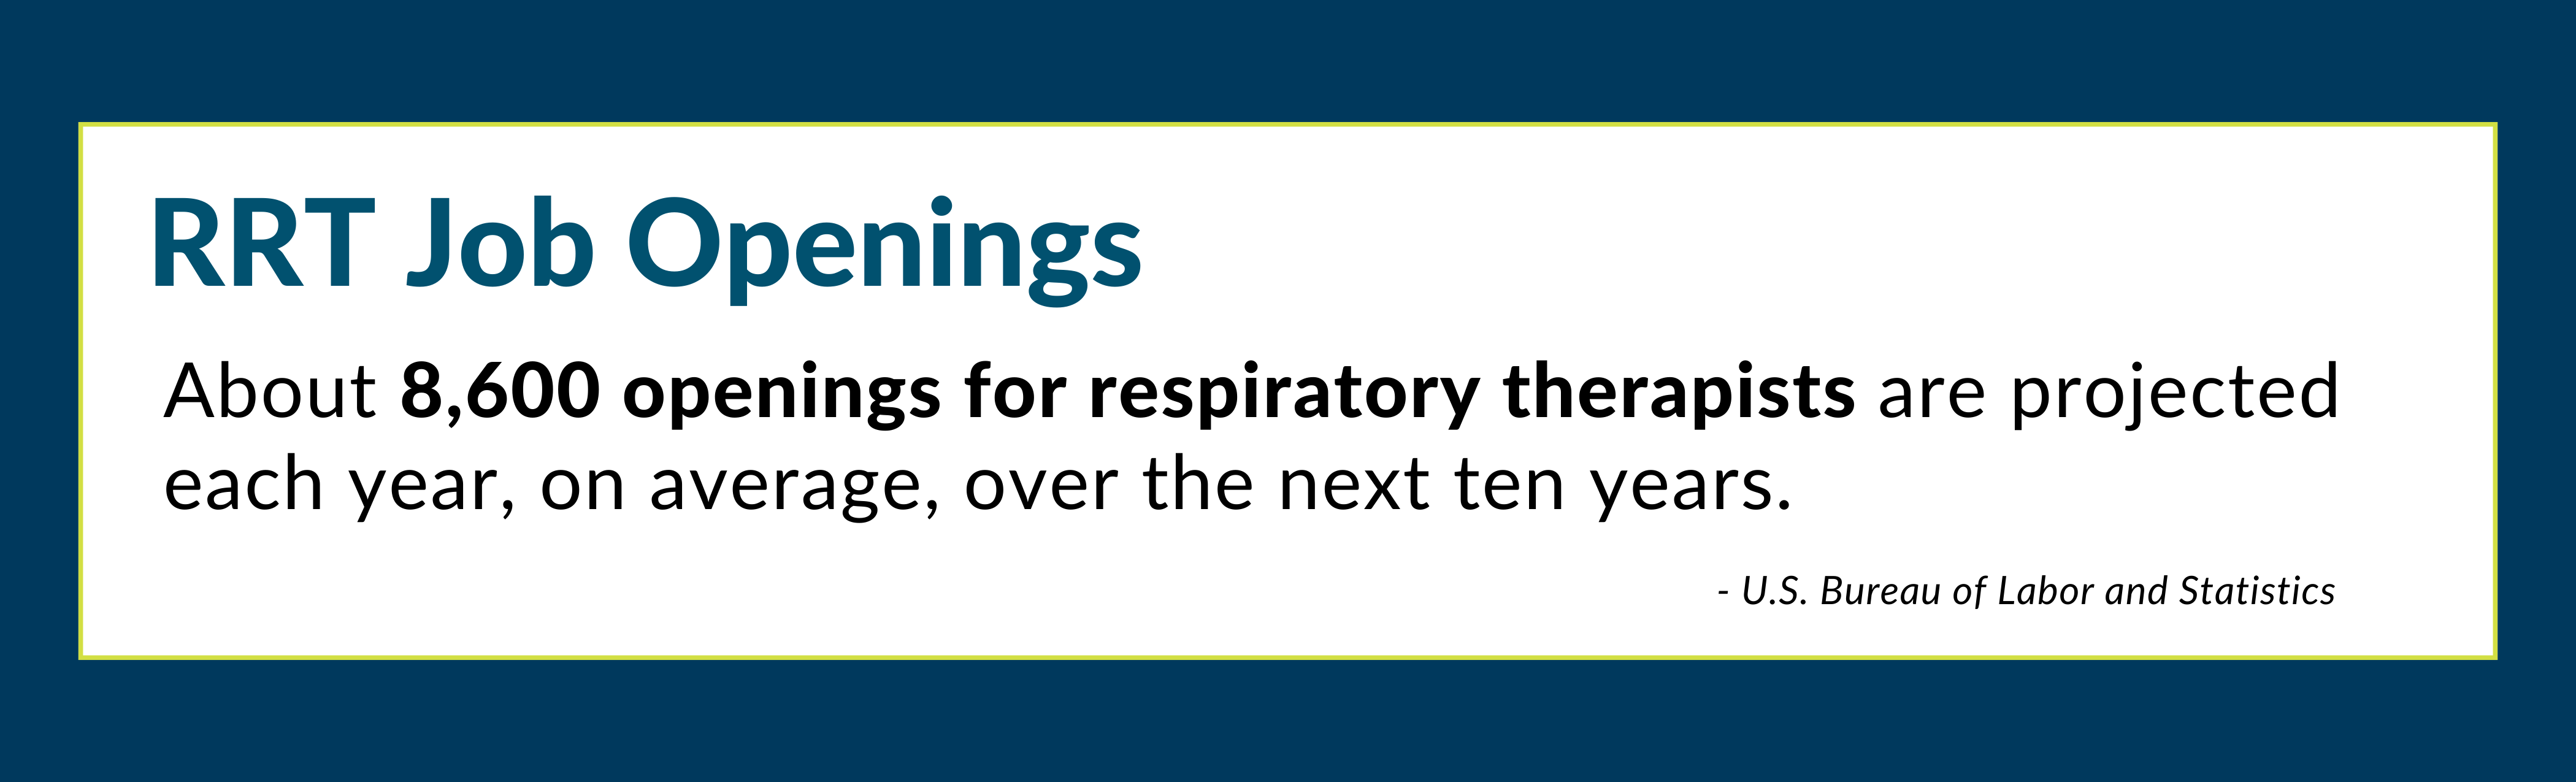 RRT Job Openings: About 8,600 openings for respiratory therapists are projected each year, on average, over the next ten years.